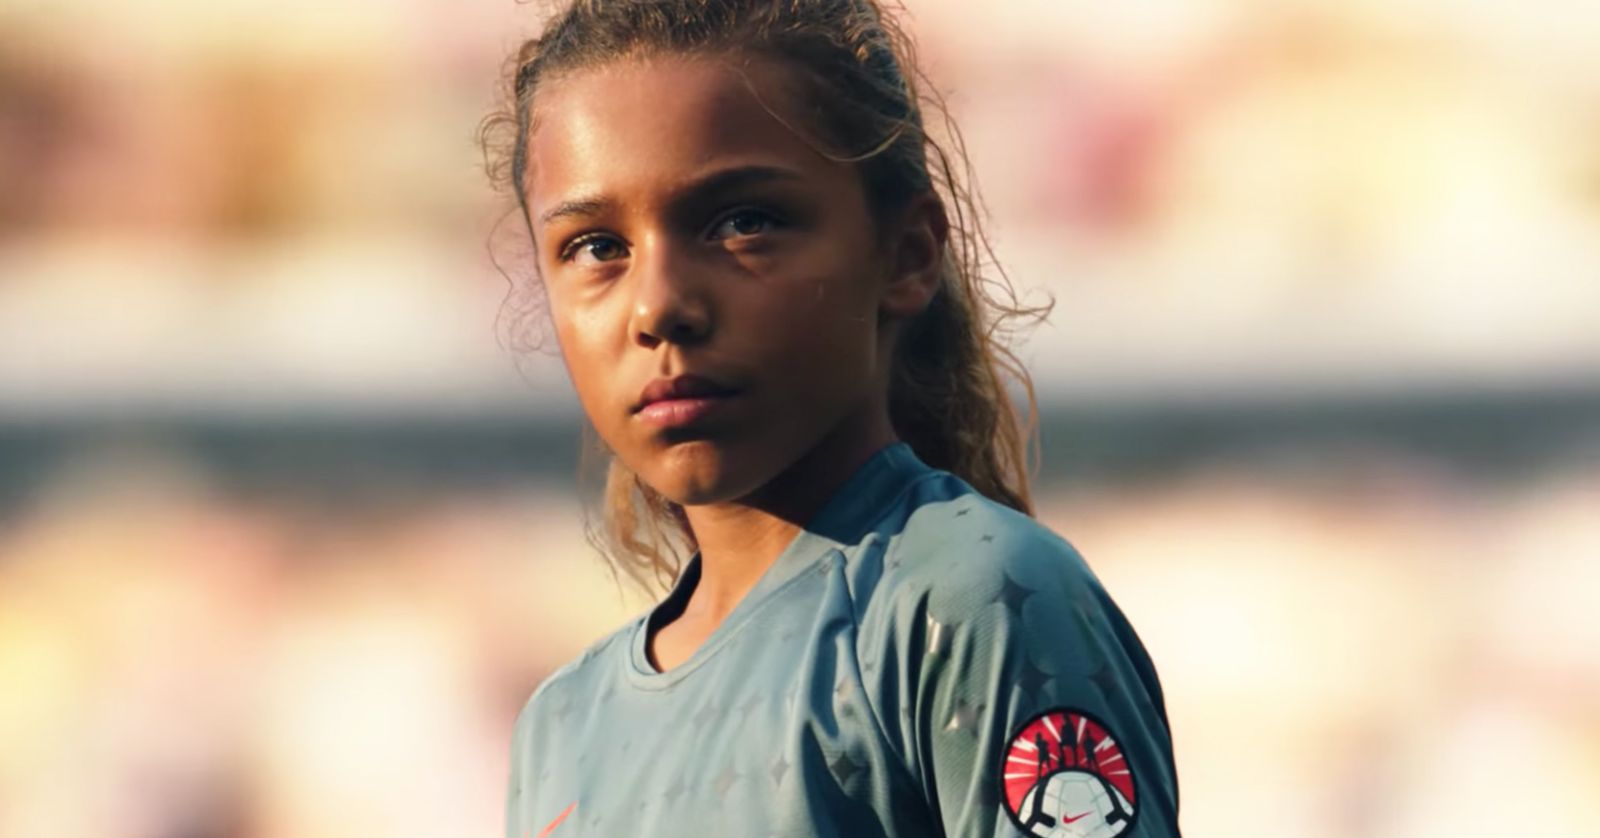 women's world cup 2019 nike commercial